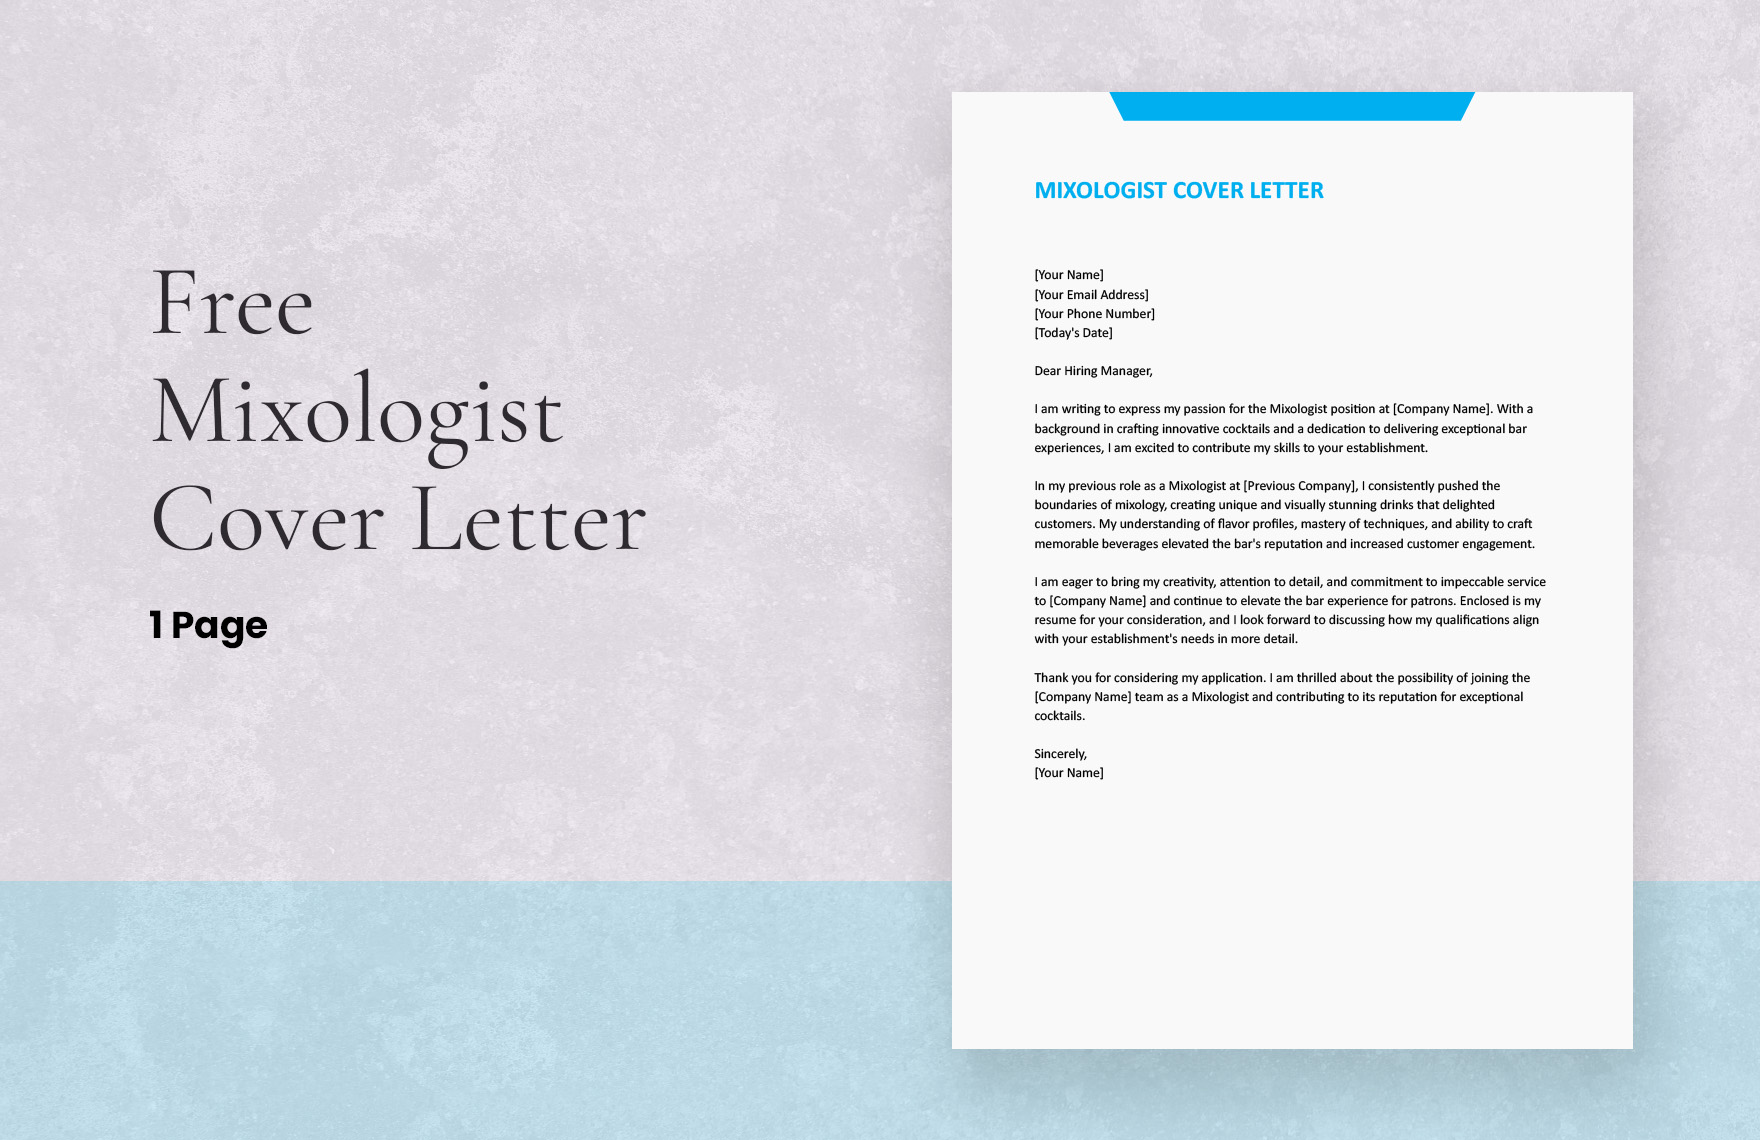 Mixologist Cover Letter in Word, Google Docs